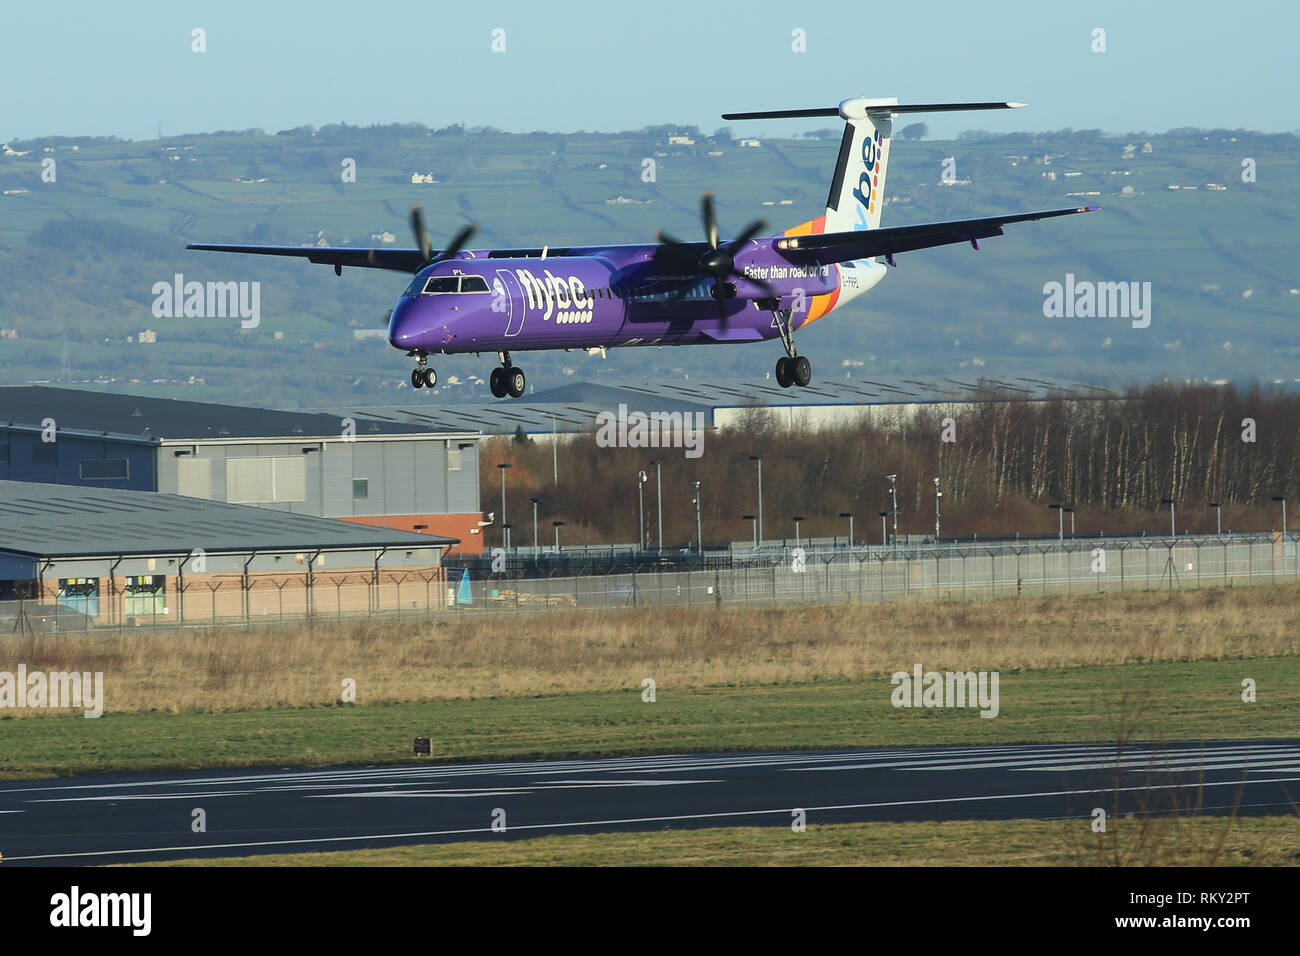 Aircraft arrive and depart from George Best Belfast City Airport in Belfast, Northern Ireland. Stock Photo